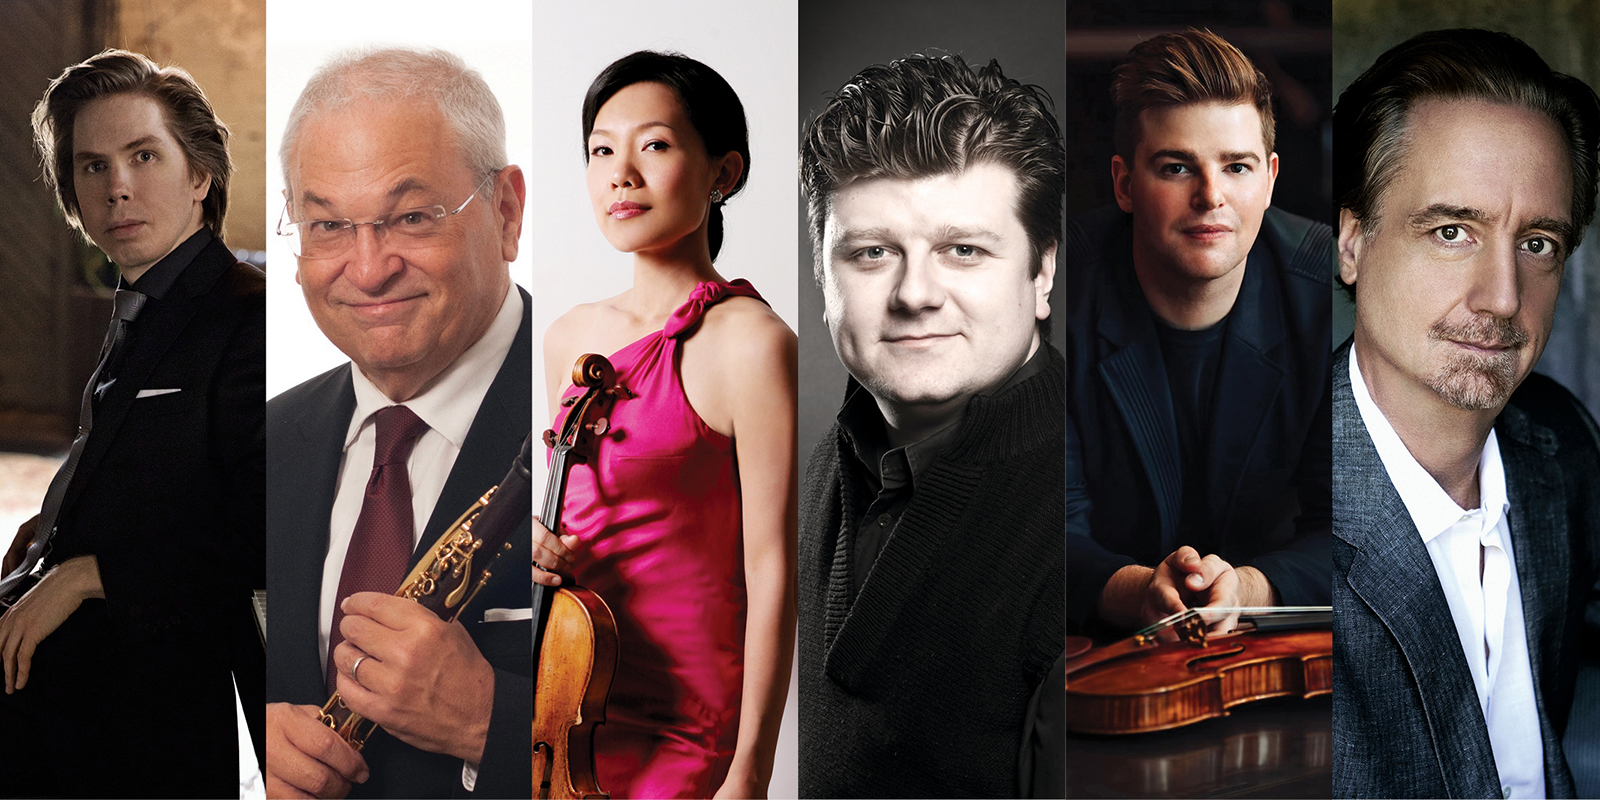 Chamber Music Society of Lincoln Center musicians